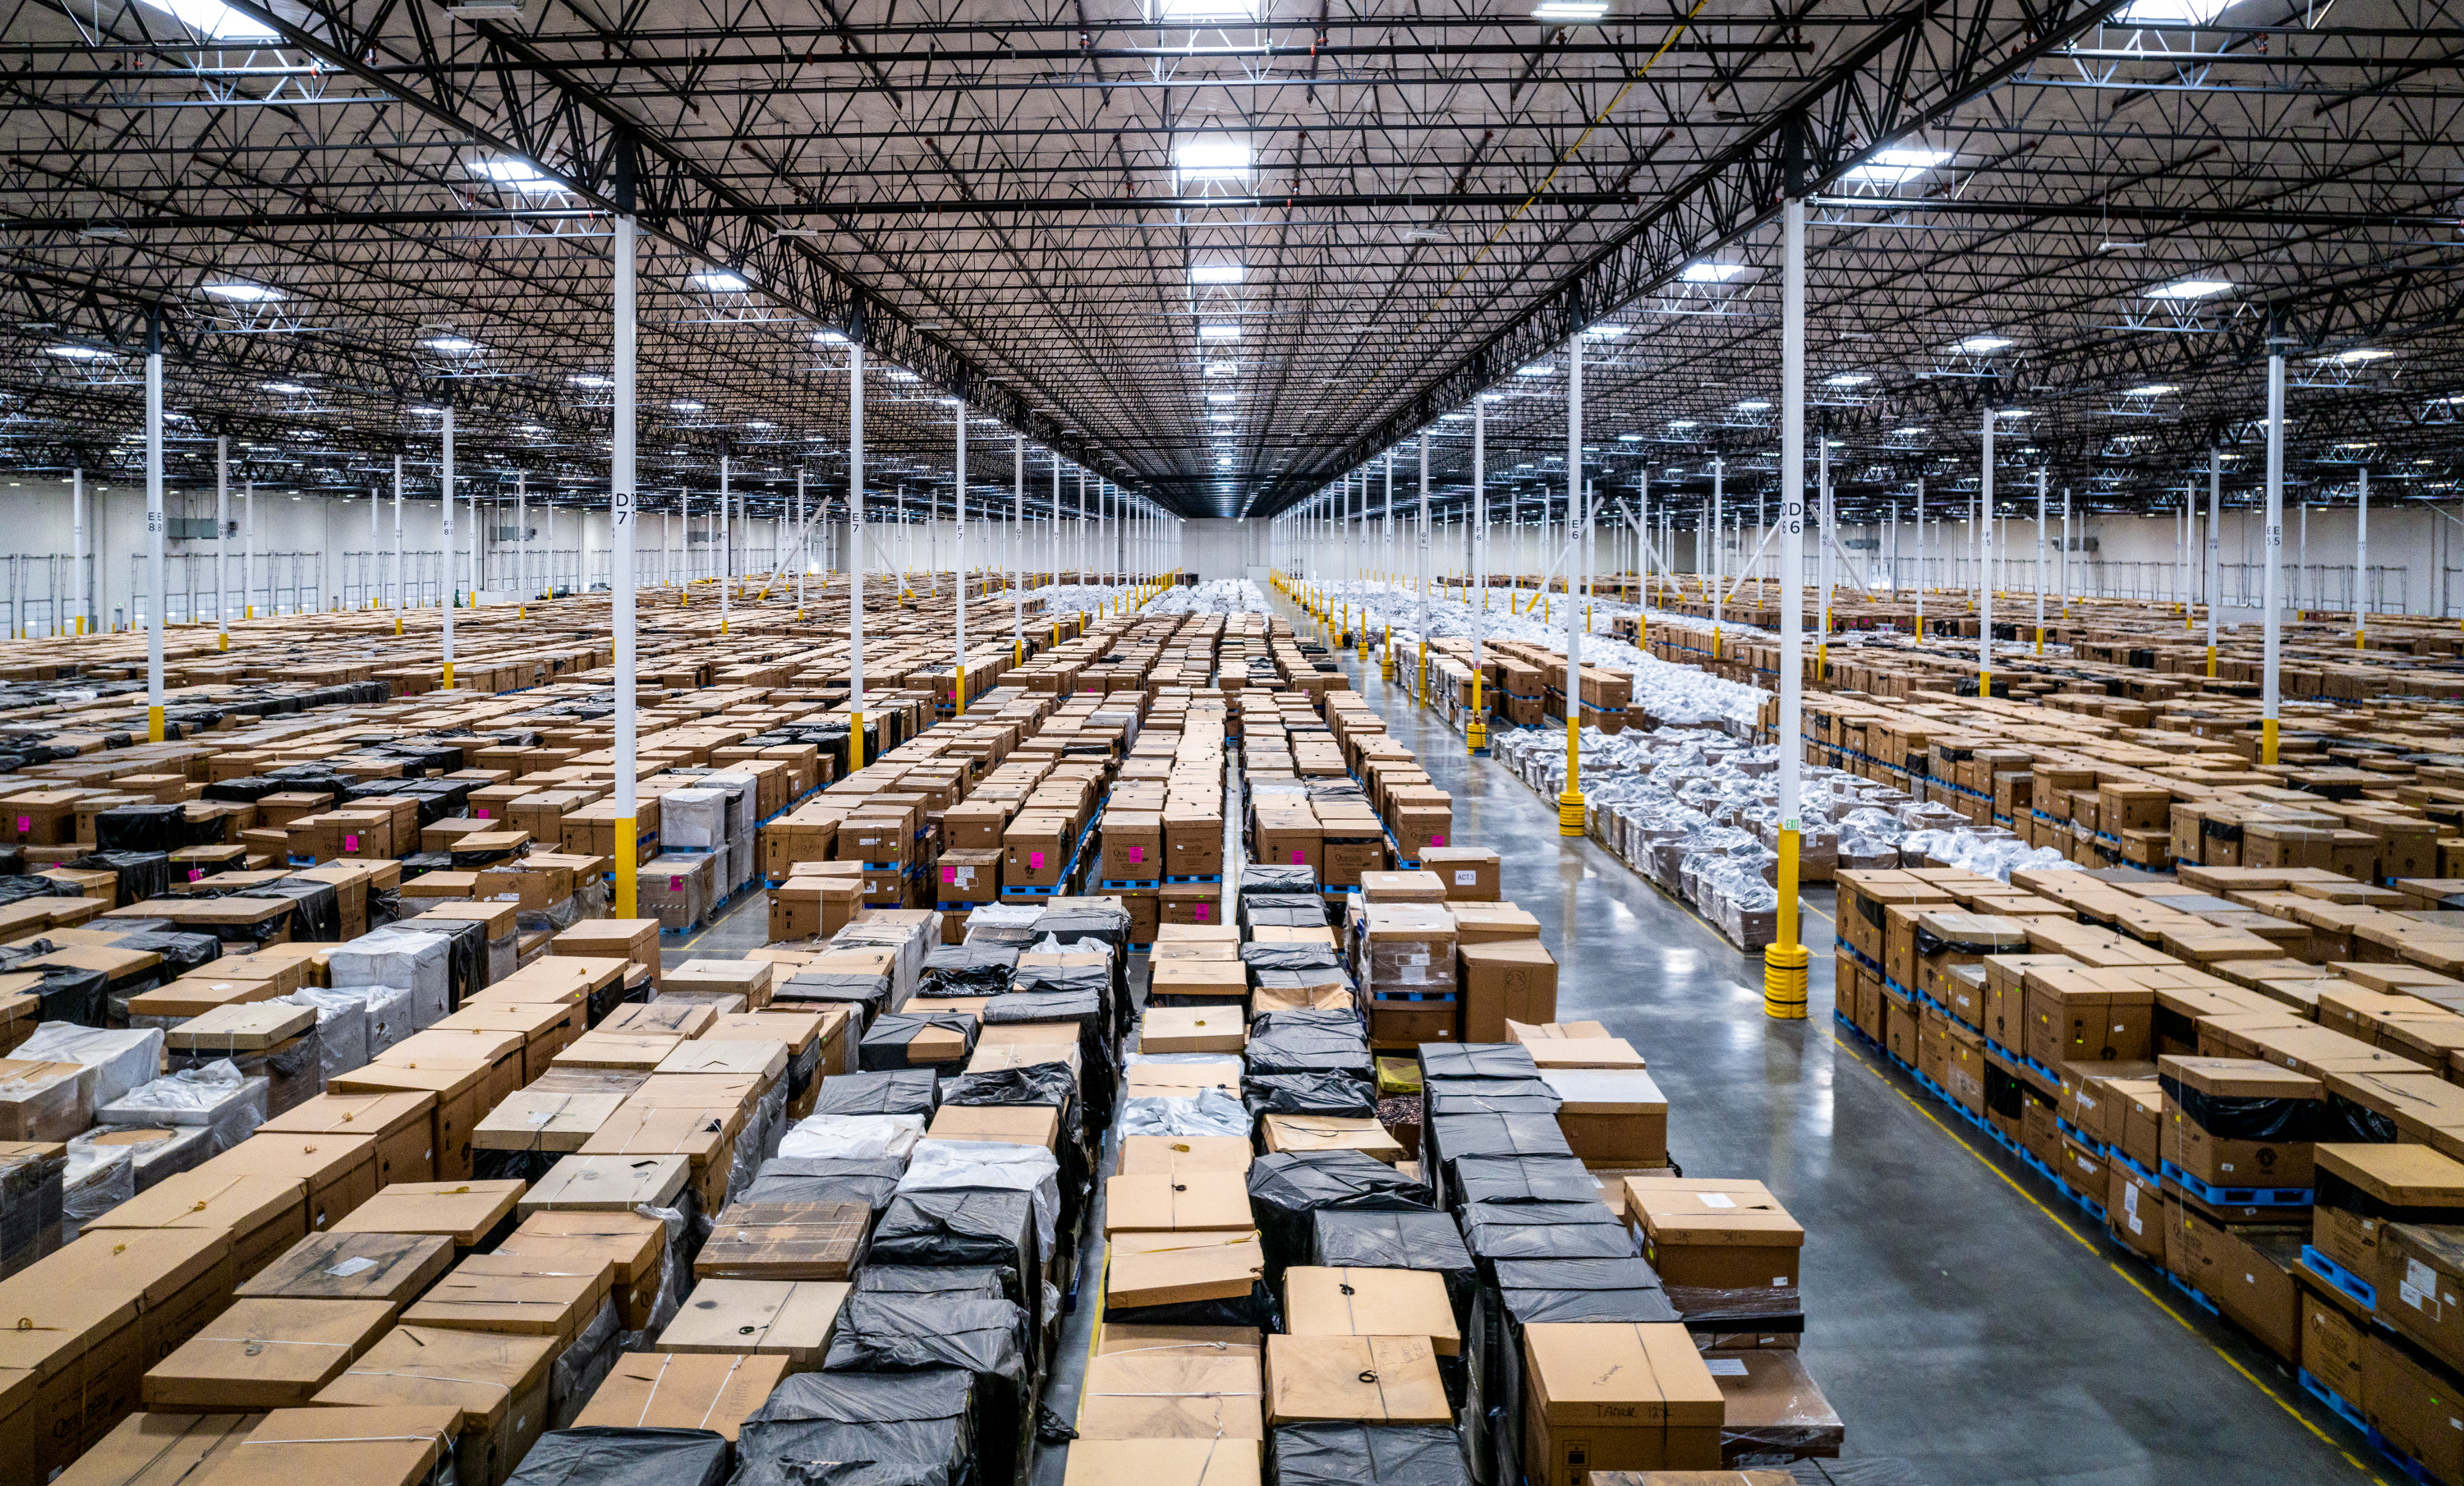 overview of a warehouse filled with rows of cardboard boxes